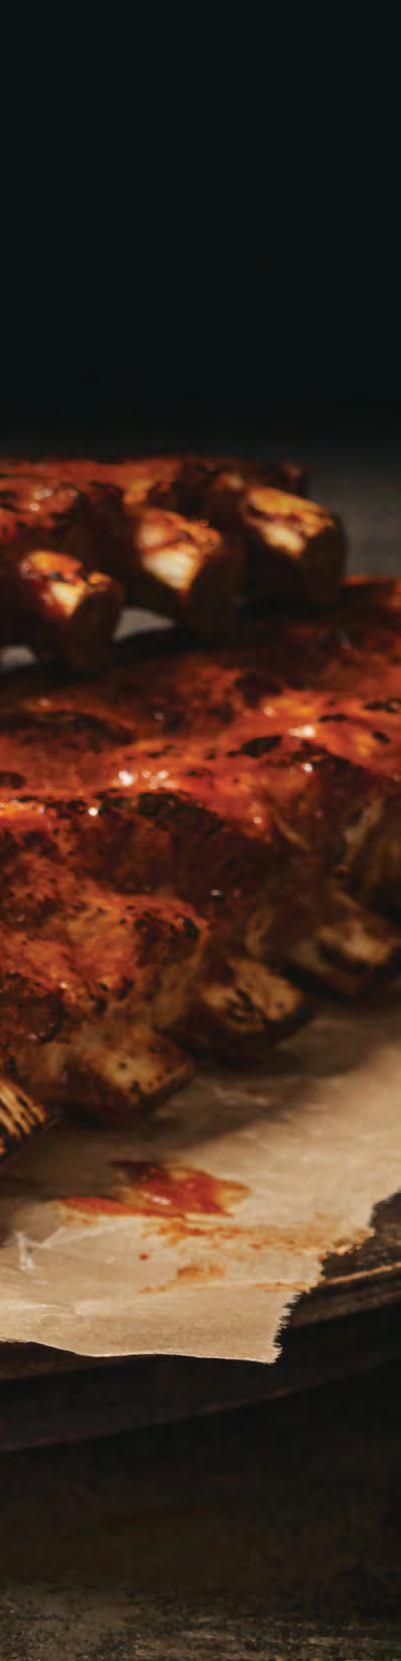 RIBS RIBS Generous and known for its fall-off-the-bone tender meat, our pork back ribs, covered in classic tomato or whisky BBQ sauce, literally melt in your mouth.